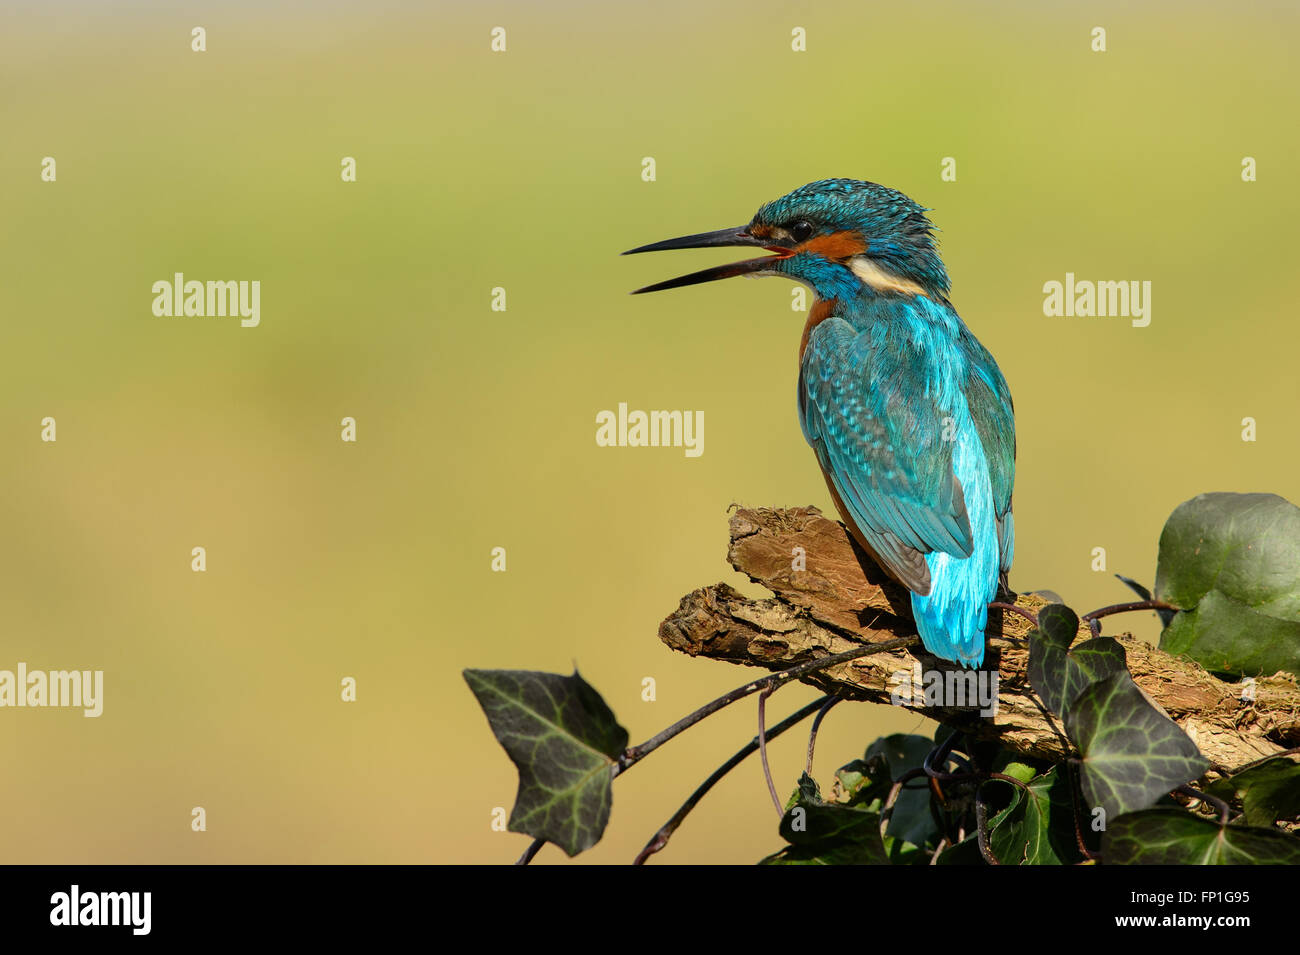 Kingfisher male calling to the approaching female, while sitting on a branch with Ivy leaves Stock Photo